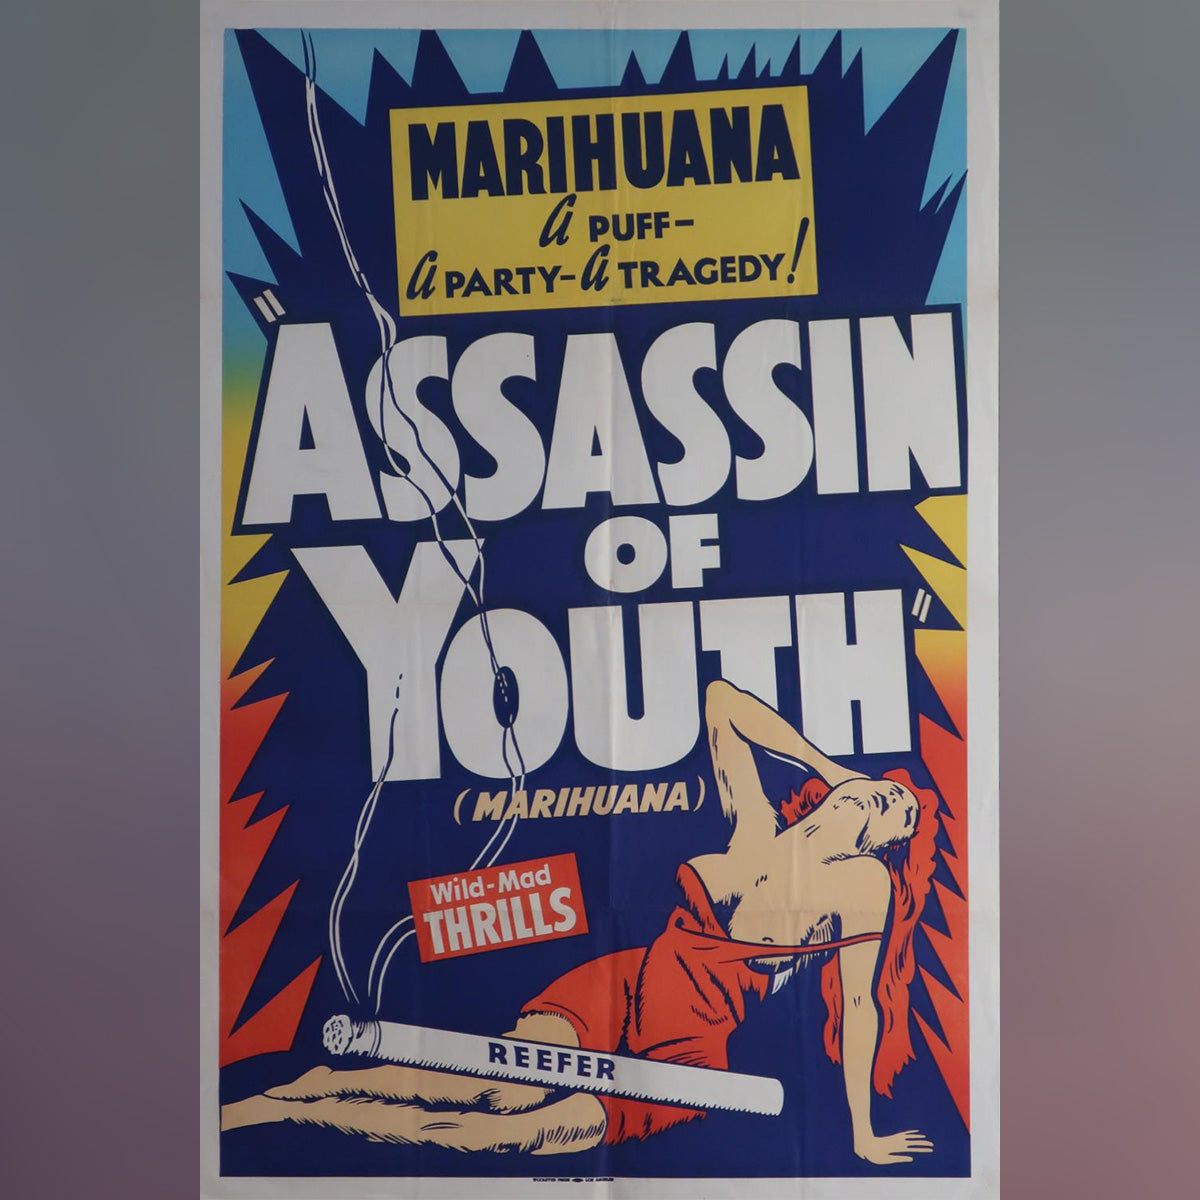 Original Movie Poster of Assassin Of Youth (1938)